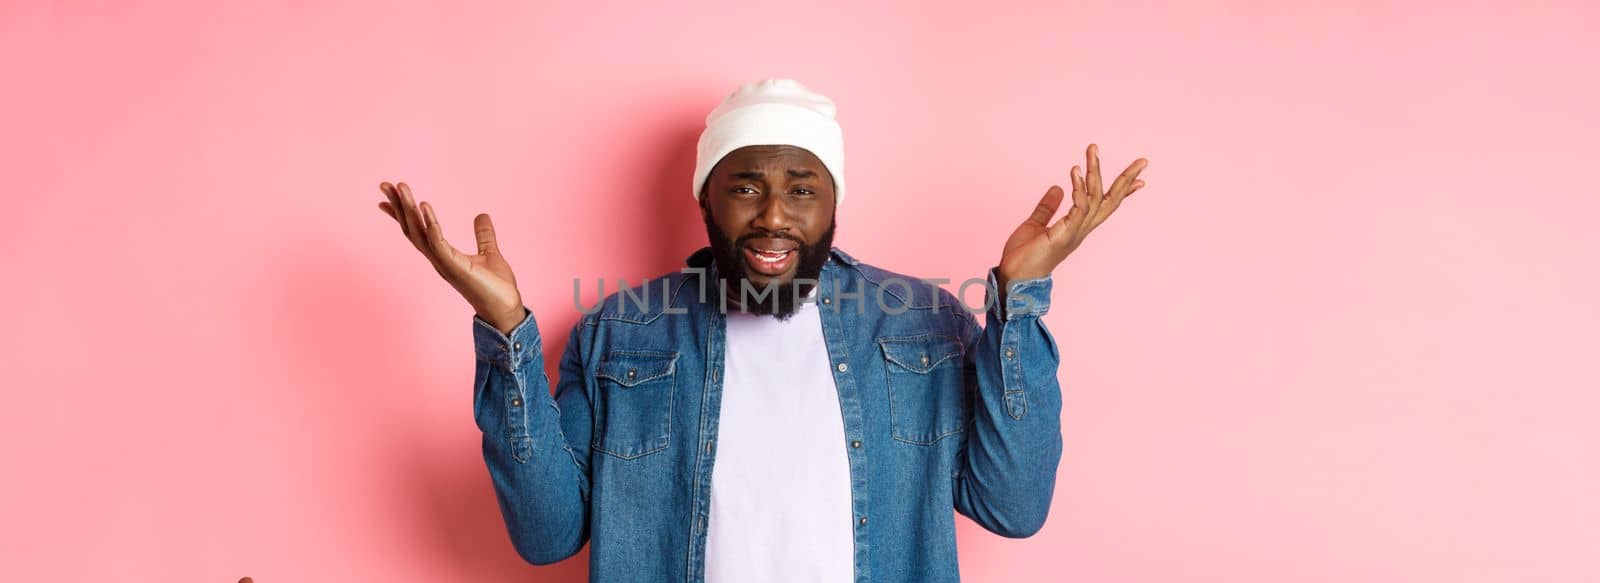 Confused and bothered Black man complaining, shrugging and raising hands up, staring with disappointment, standing over pink background.